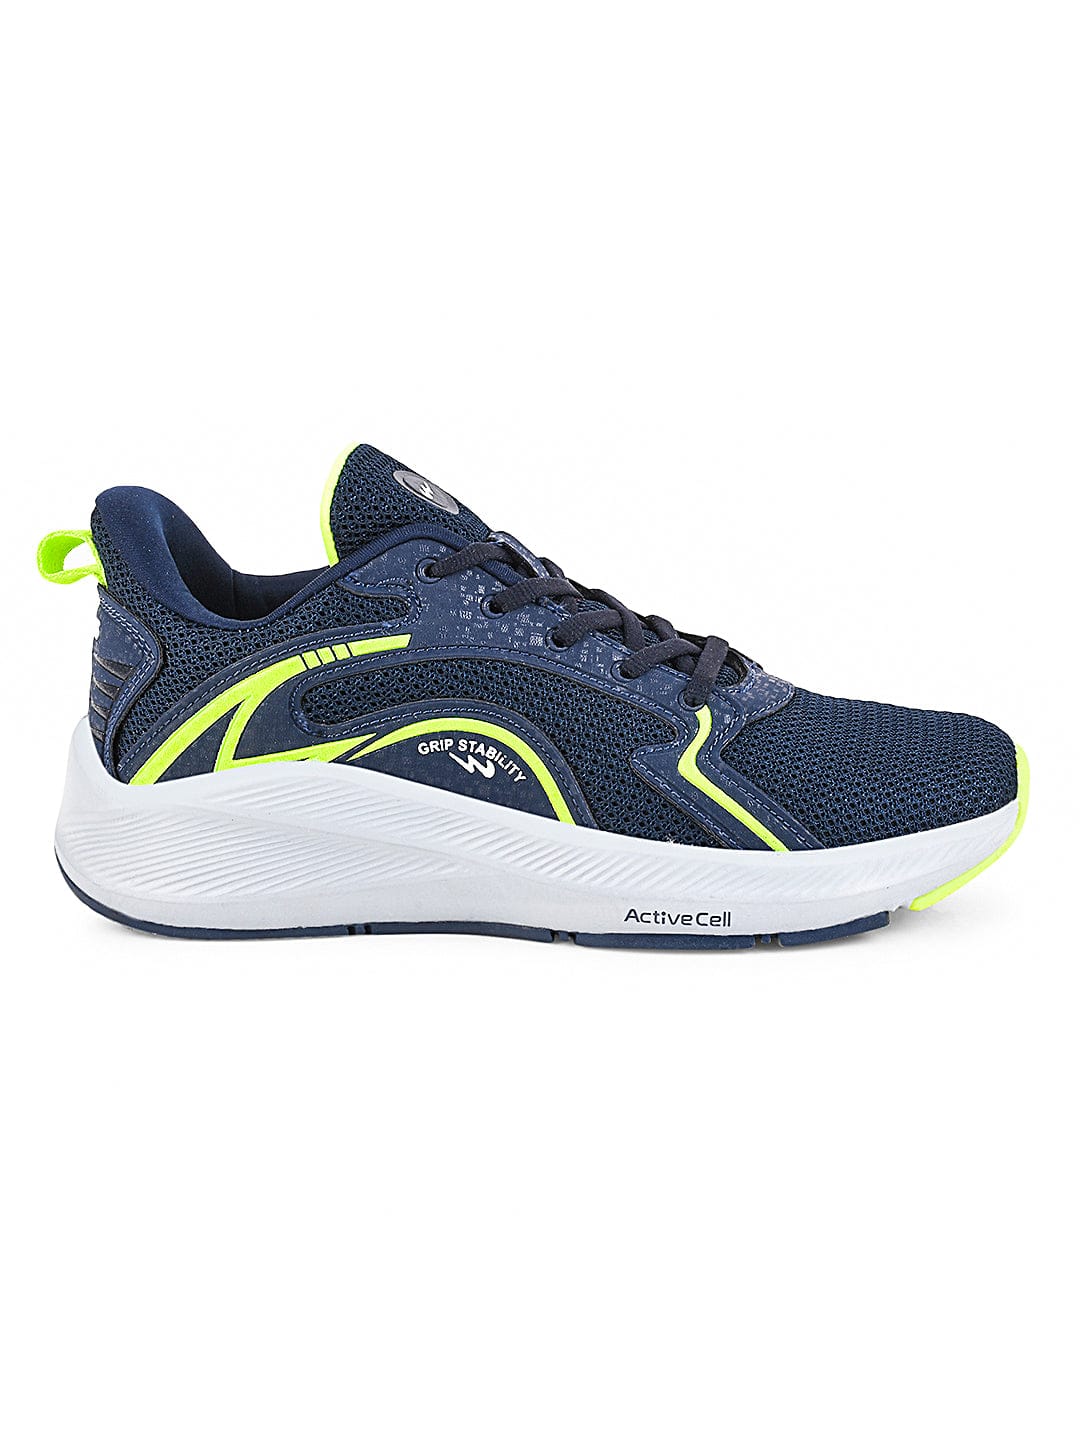 Buy Running Shoes For Child: Penny-Ch-Navy-F-Grn | Campus Shoes